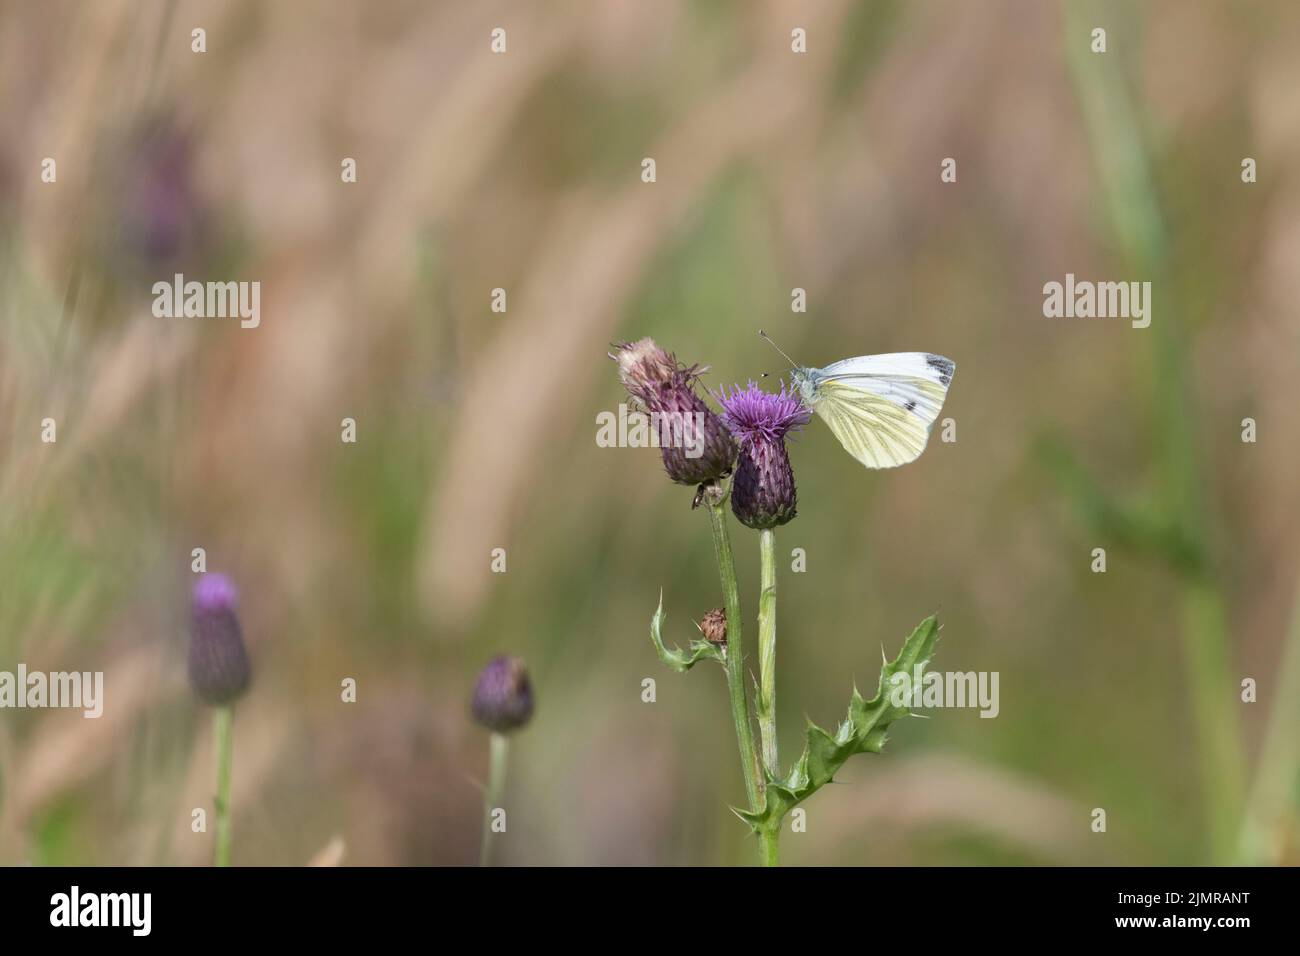 A Green-Veined White Butterfly on a Creeping Thistle Flowerhead (Cirsium Arvense) in a Wildflower Meadow Stock Photo